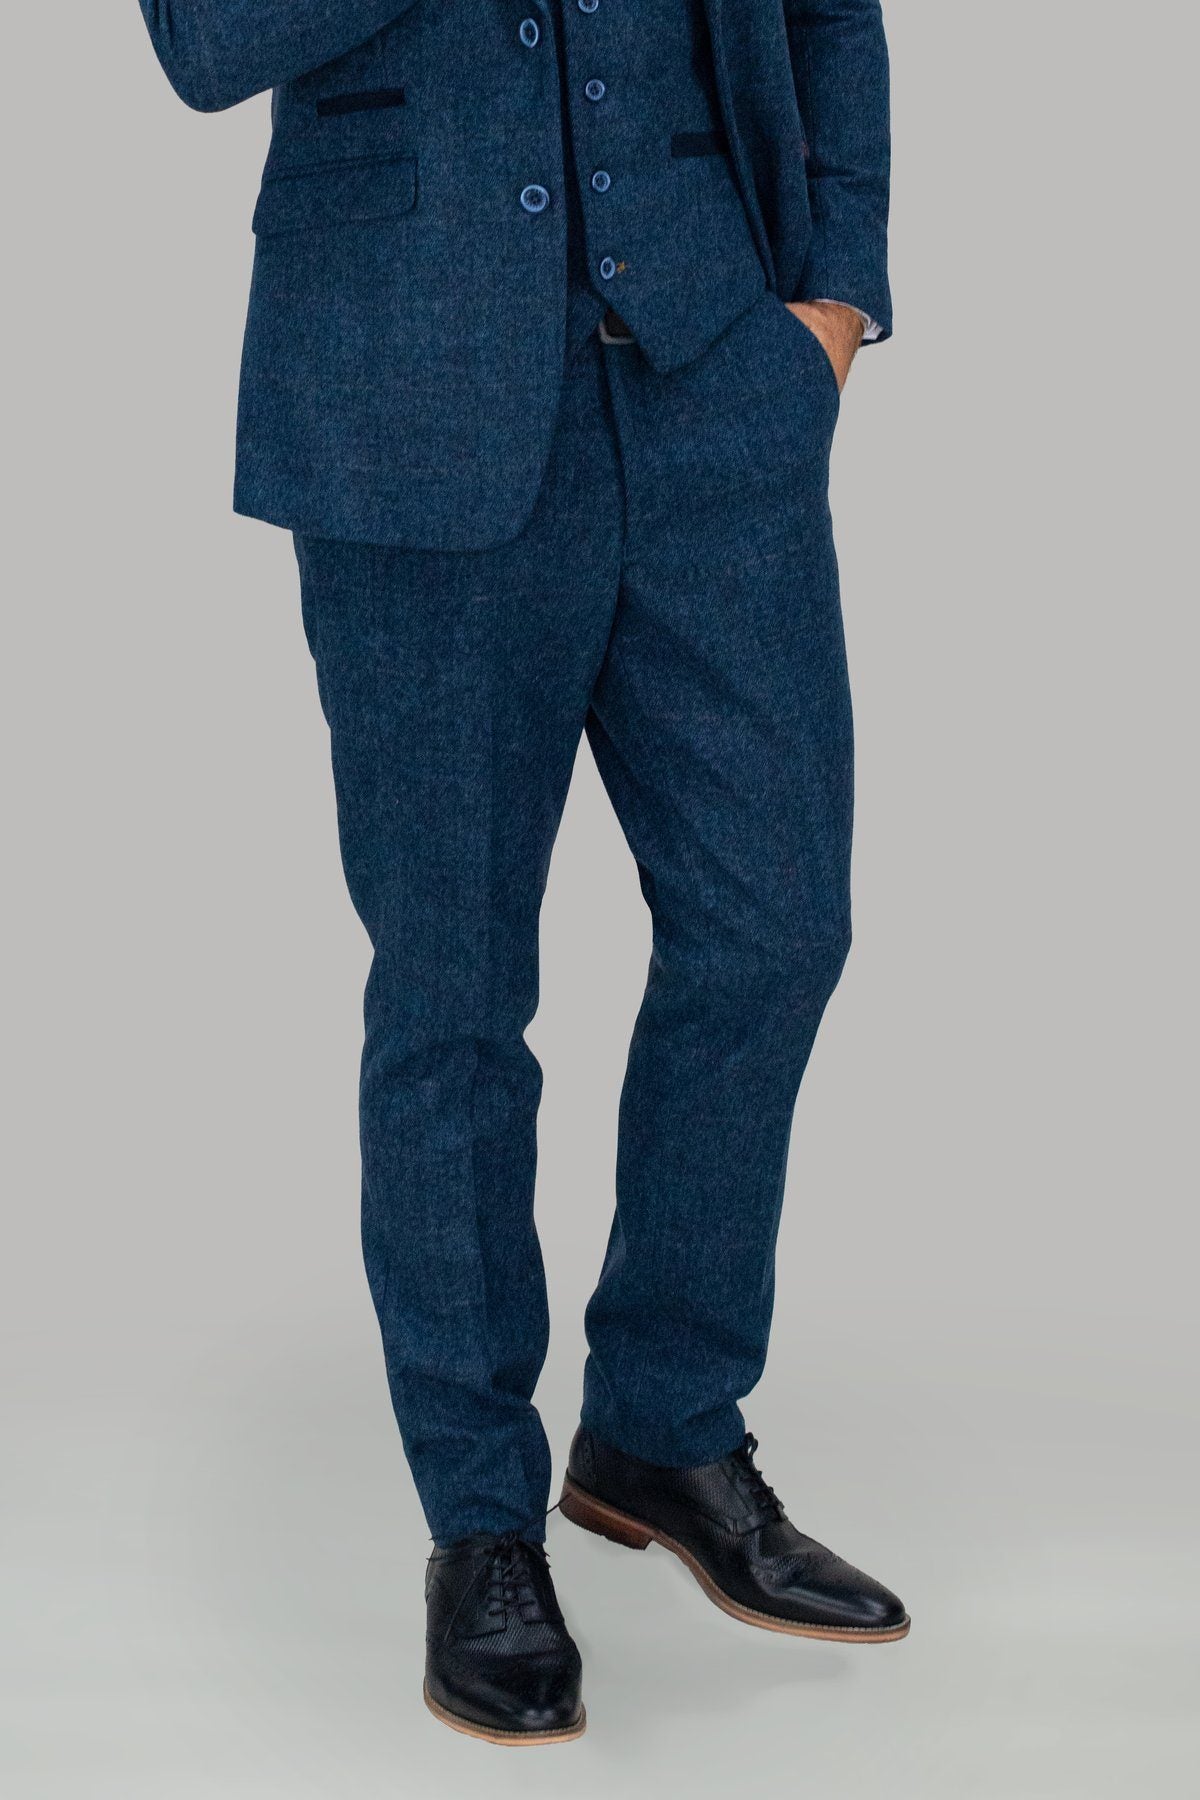 Blue Tweed Trousers - STOCK CLEARANCE - Trousers - 30R - THREADPEPPER